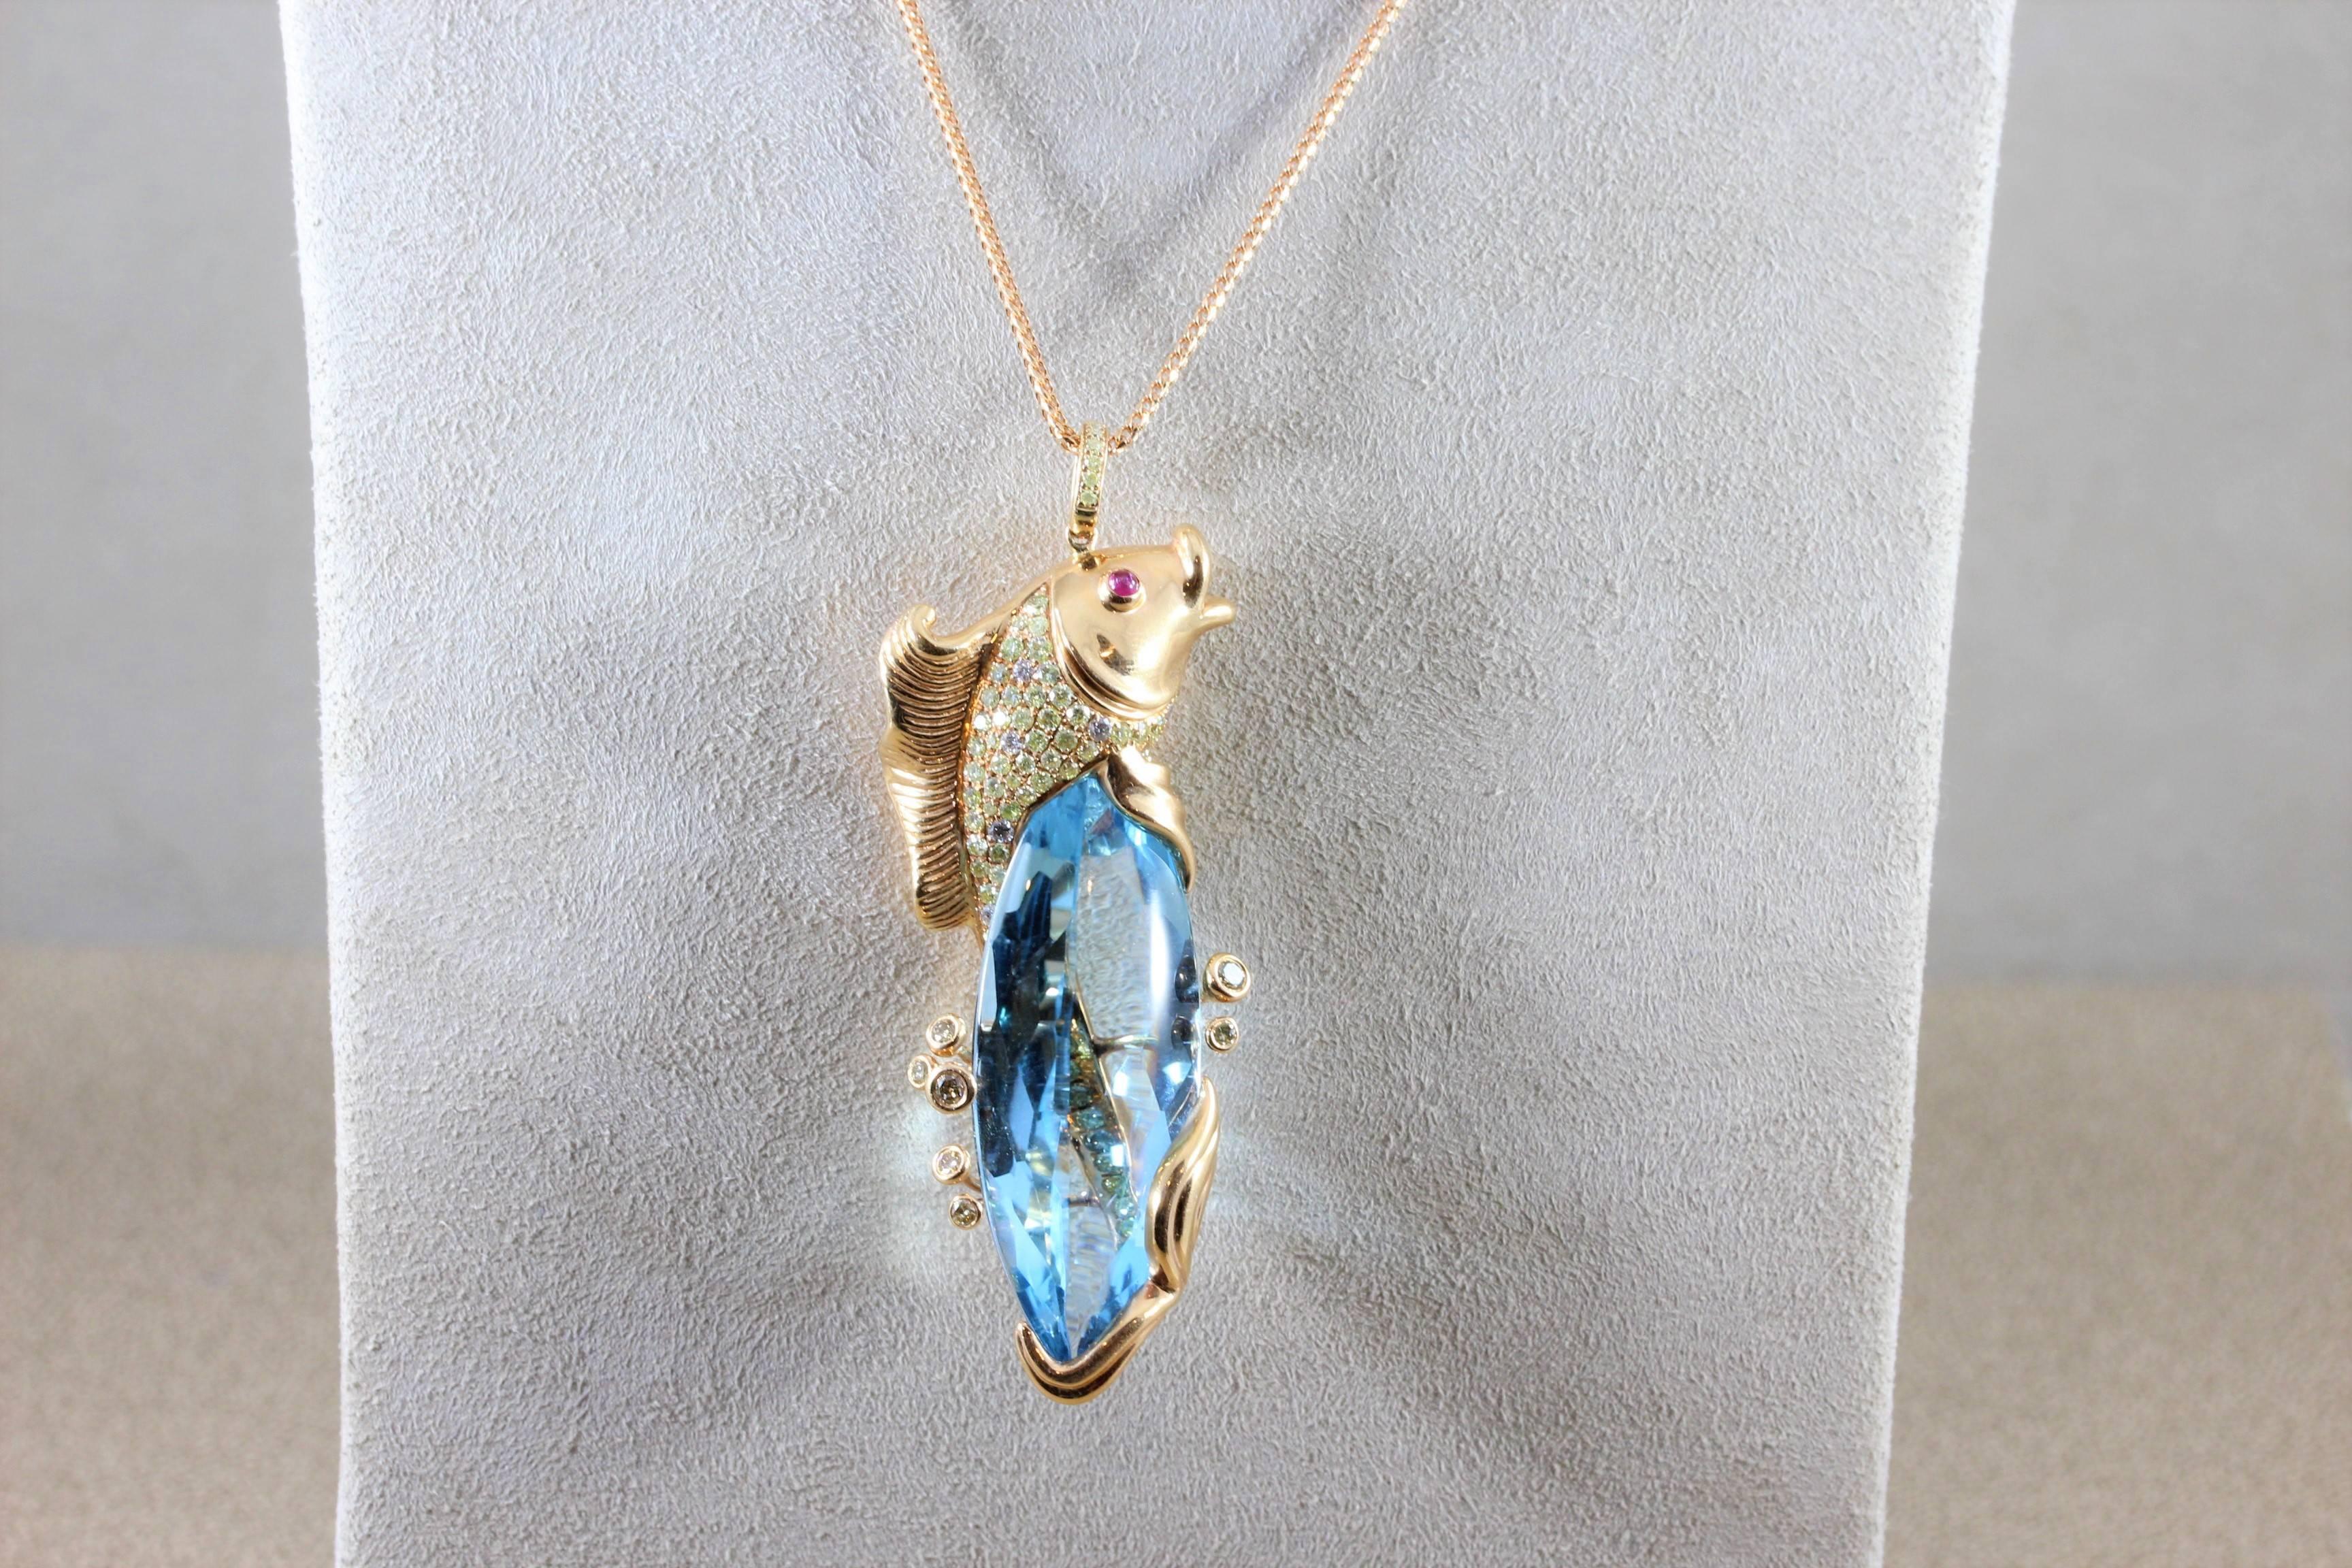 A uniquely beautiful rose gold pendant featuring a fine 41.90 carat blue topaz. The gemstone is surrounded by a diamond studded koi fish that wraps around the stone. The 18K rose gold koi fish has two ruby cabochon eyes.

Pendant Length: 2 inches 
